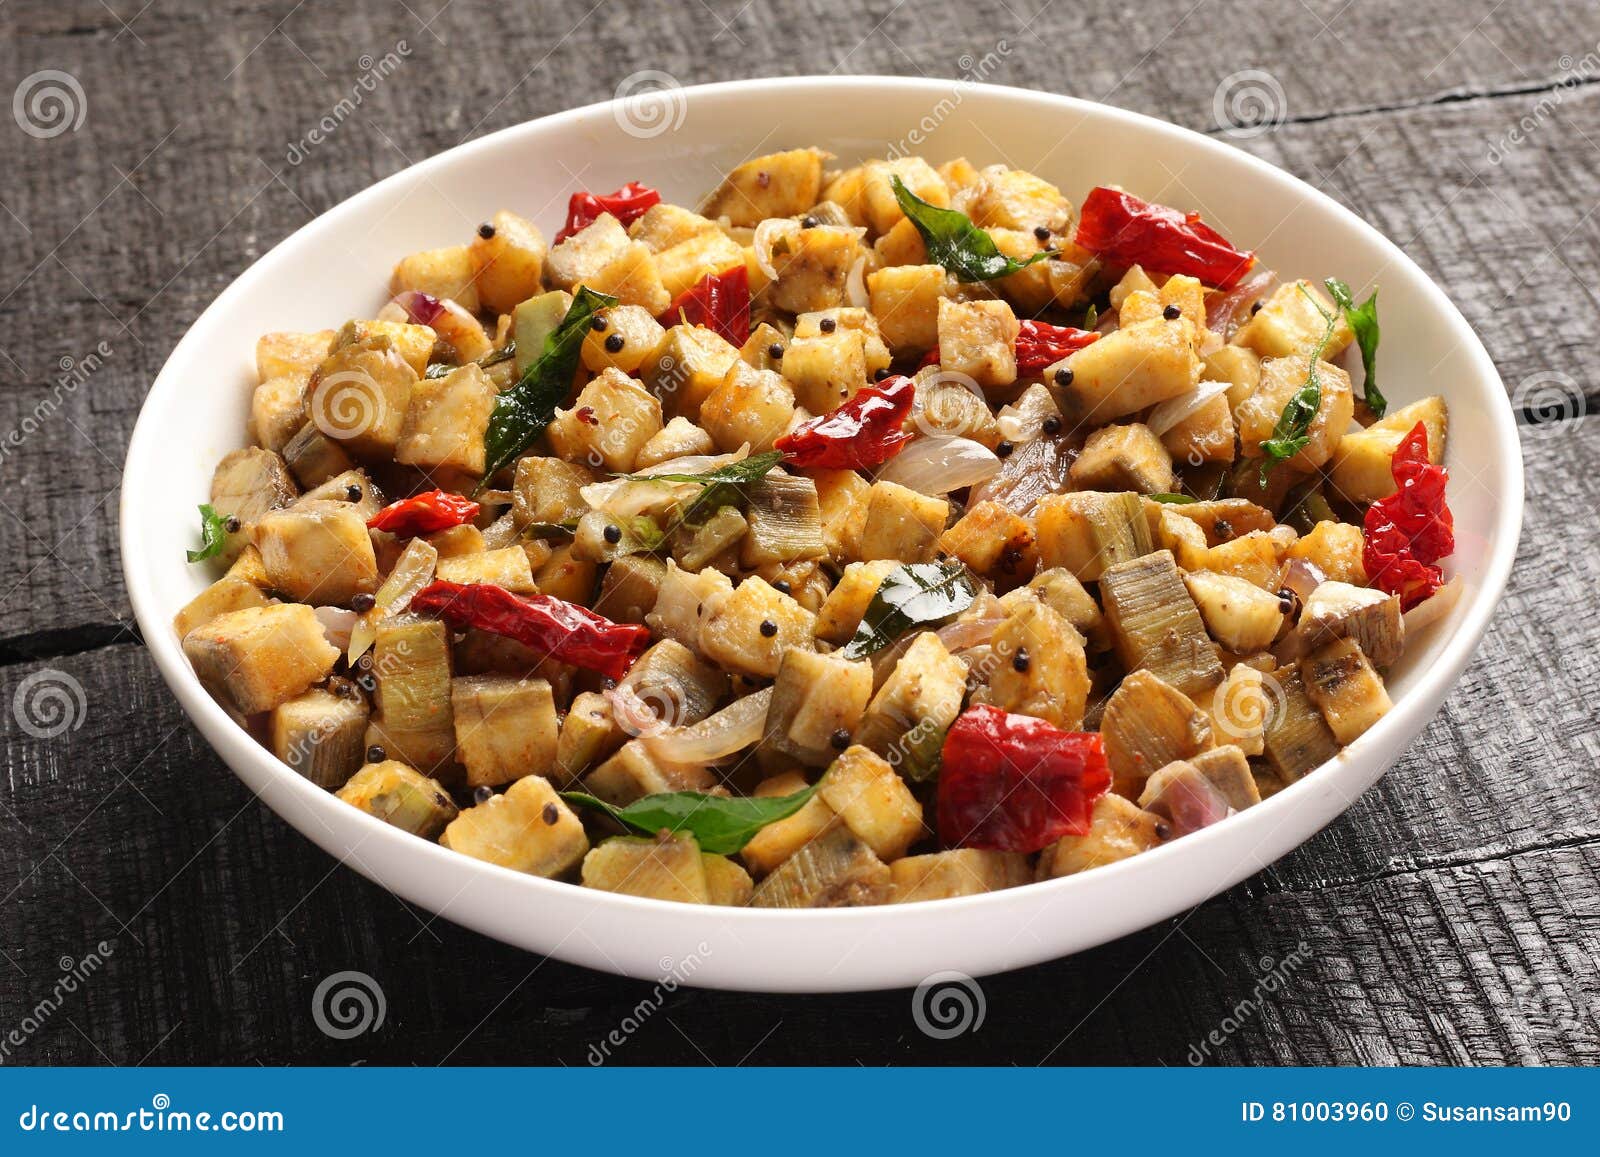 Delicious Banana Stir Fry with Spices . Stock Photo - Image of thali ...